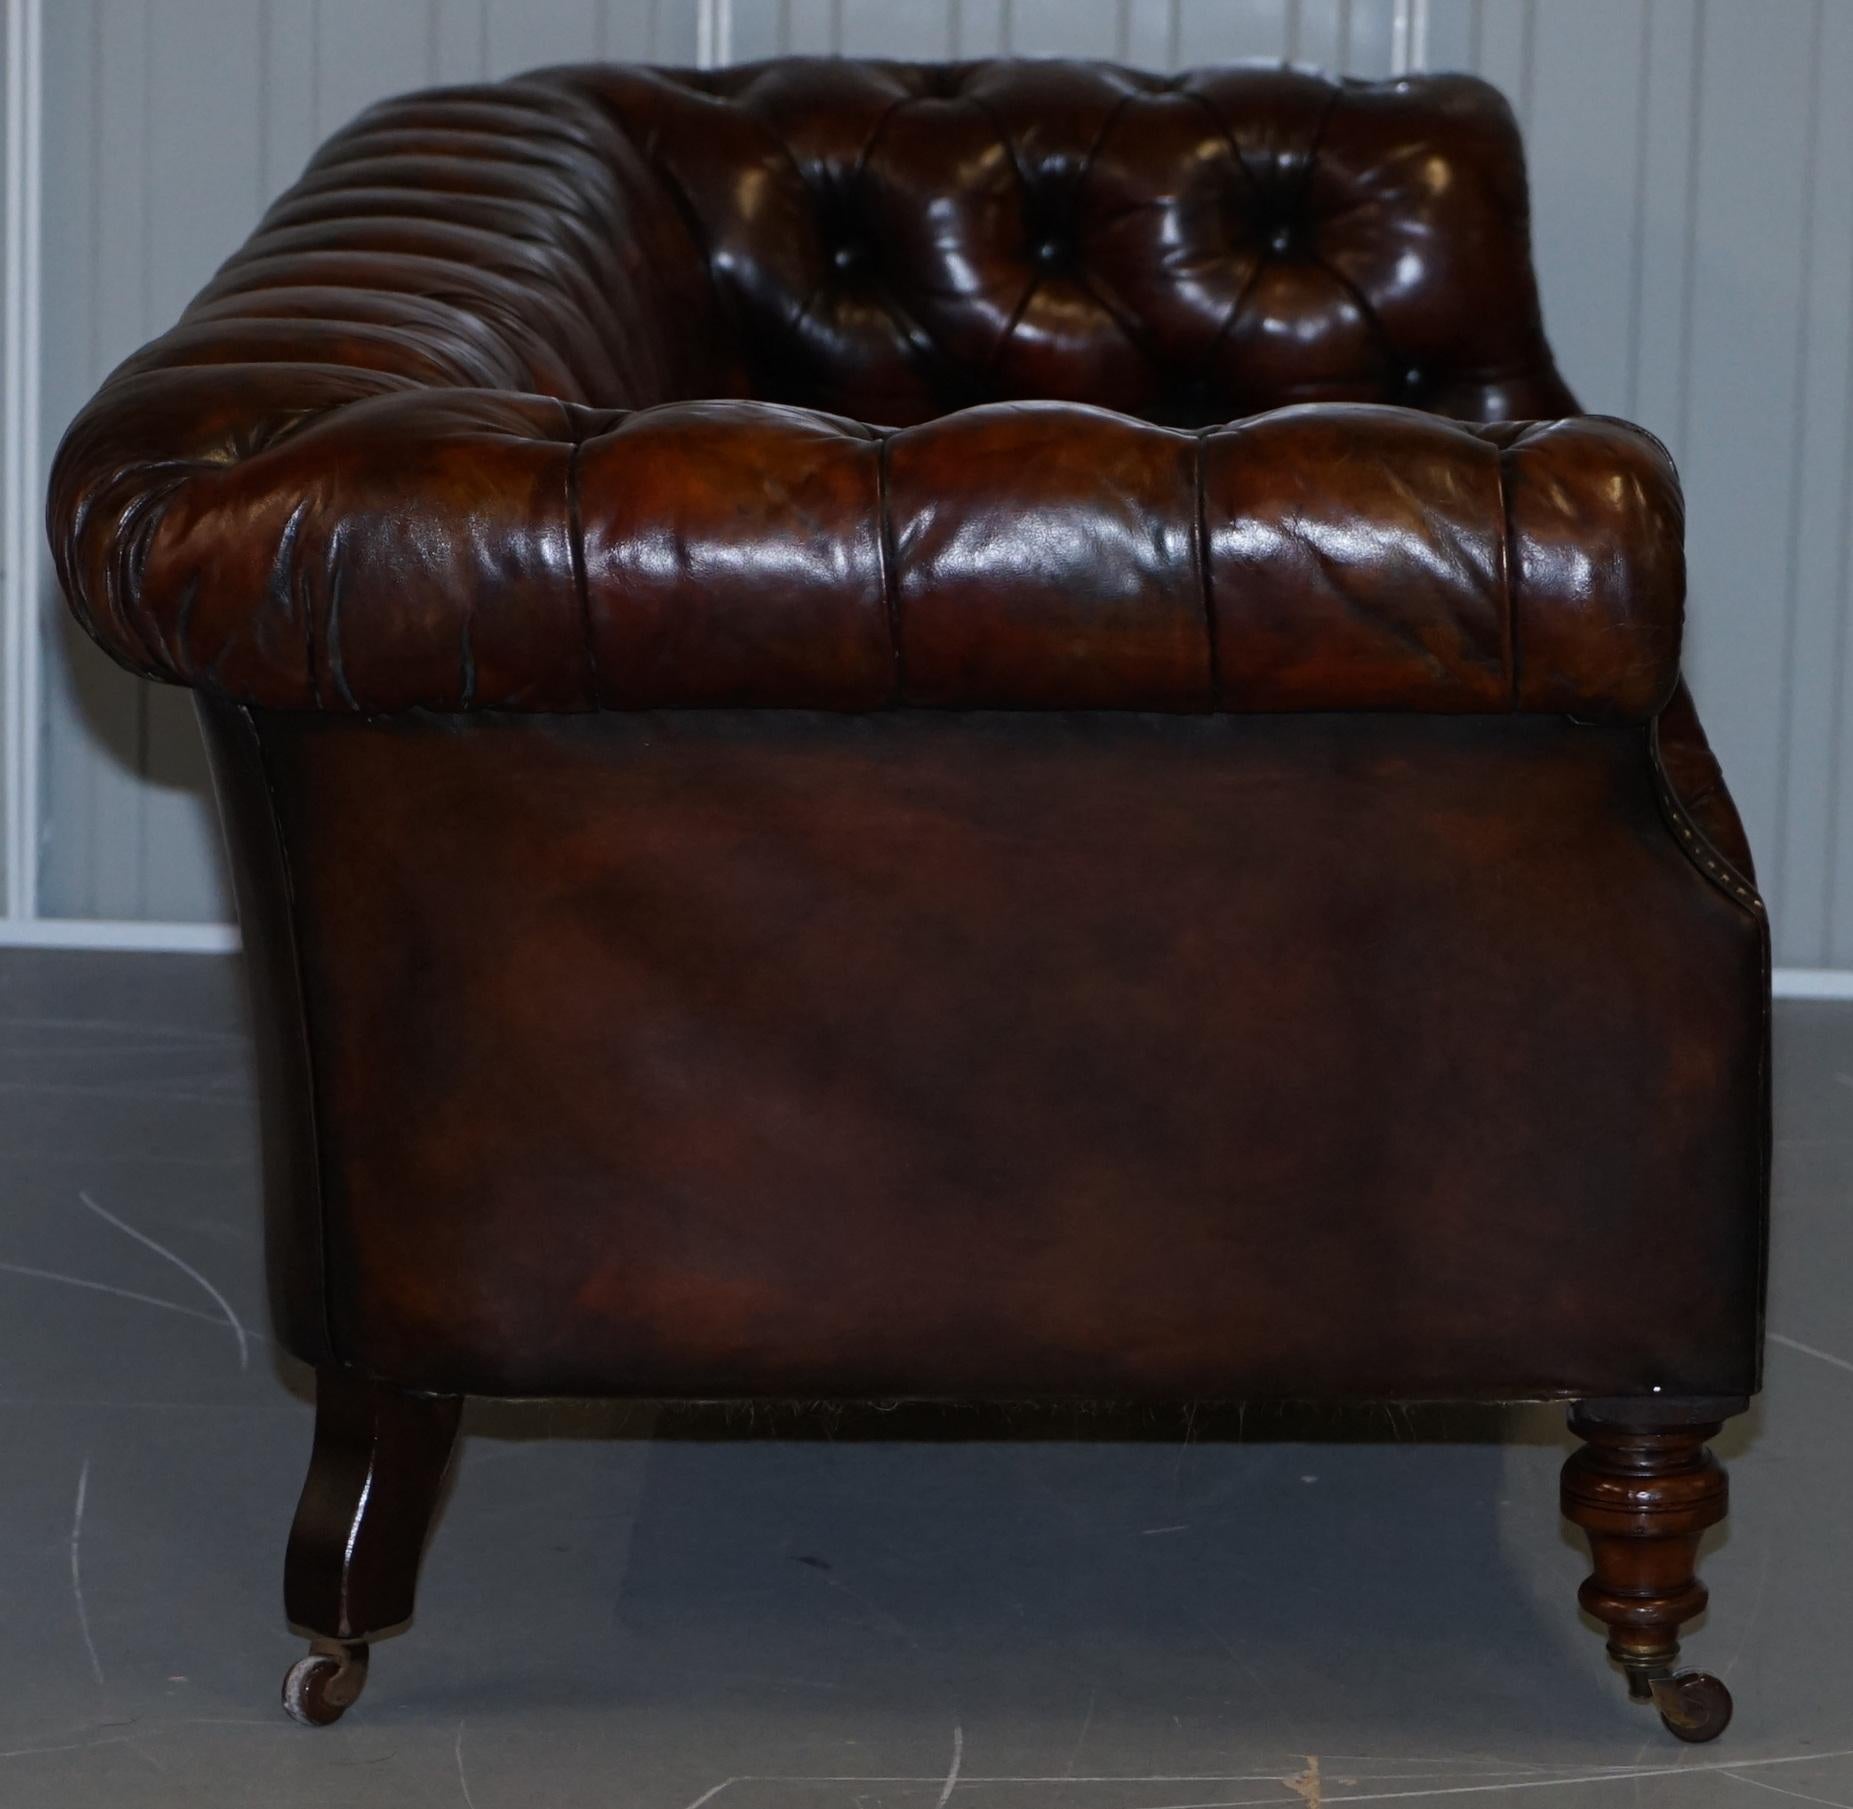 Victorian Serpentine Hand Dyed Restored Whisky Brown Leather Chesterfield Sofa For Sale 11